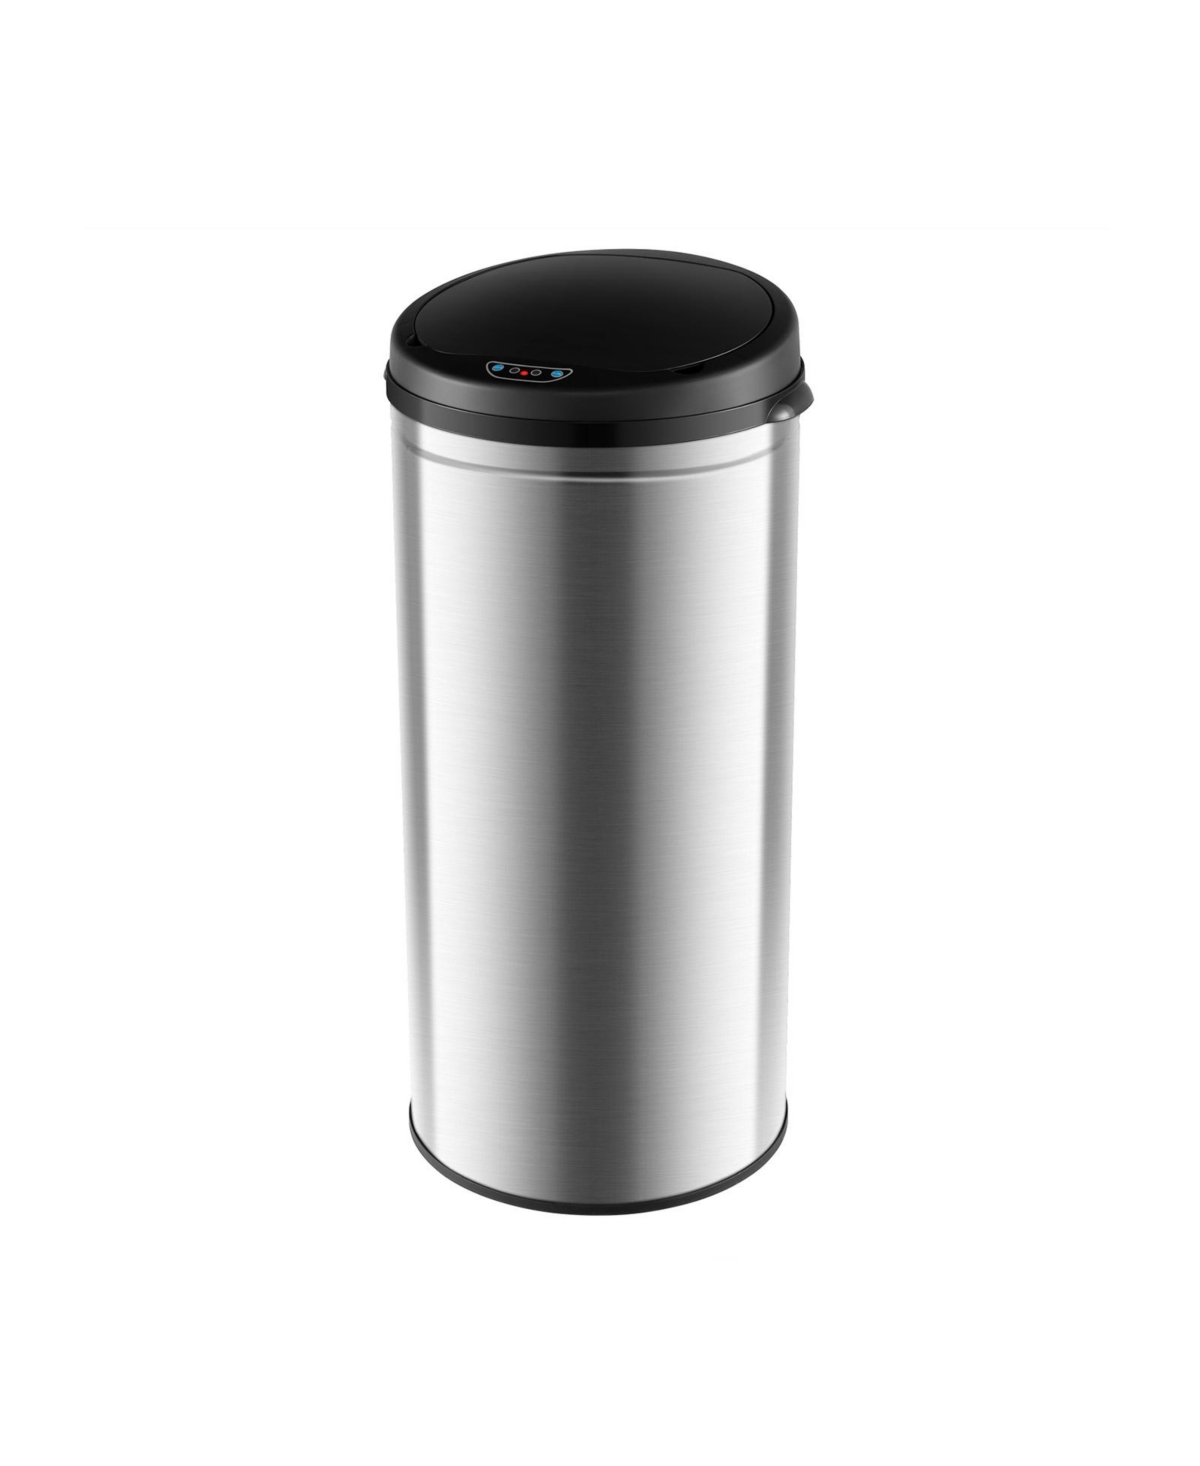 8 Gal Automatic Trash Can with Stainless Steel Frame Touchless Waste Bin - Silver